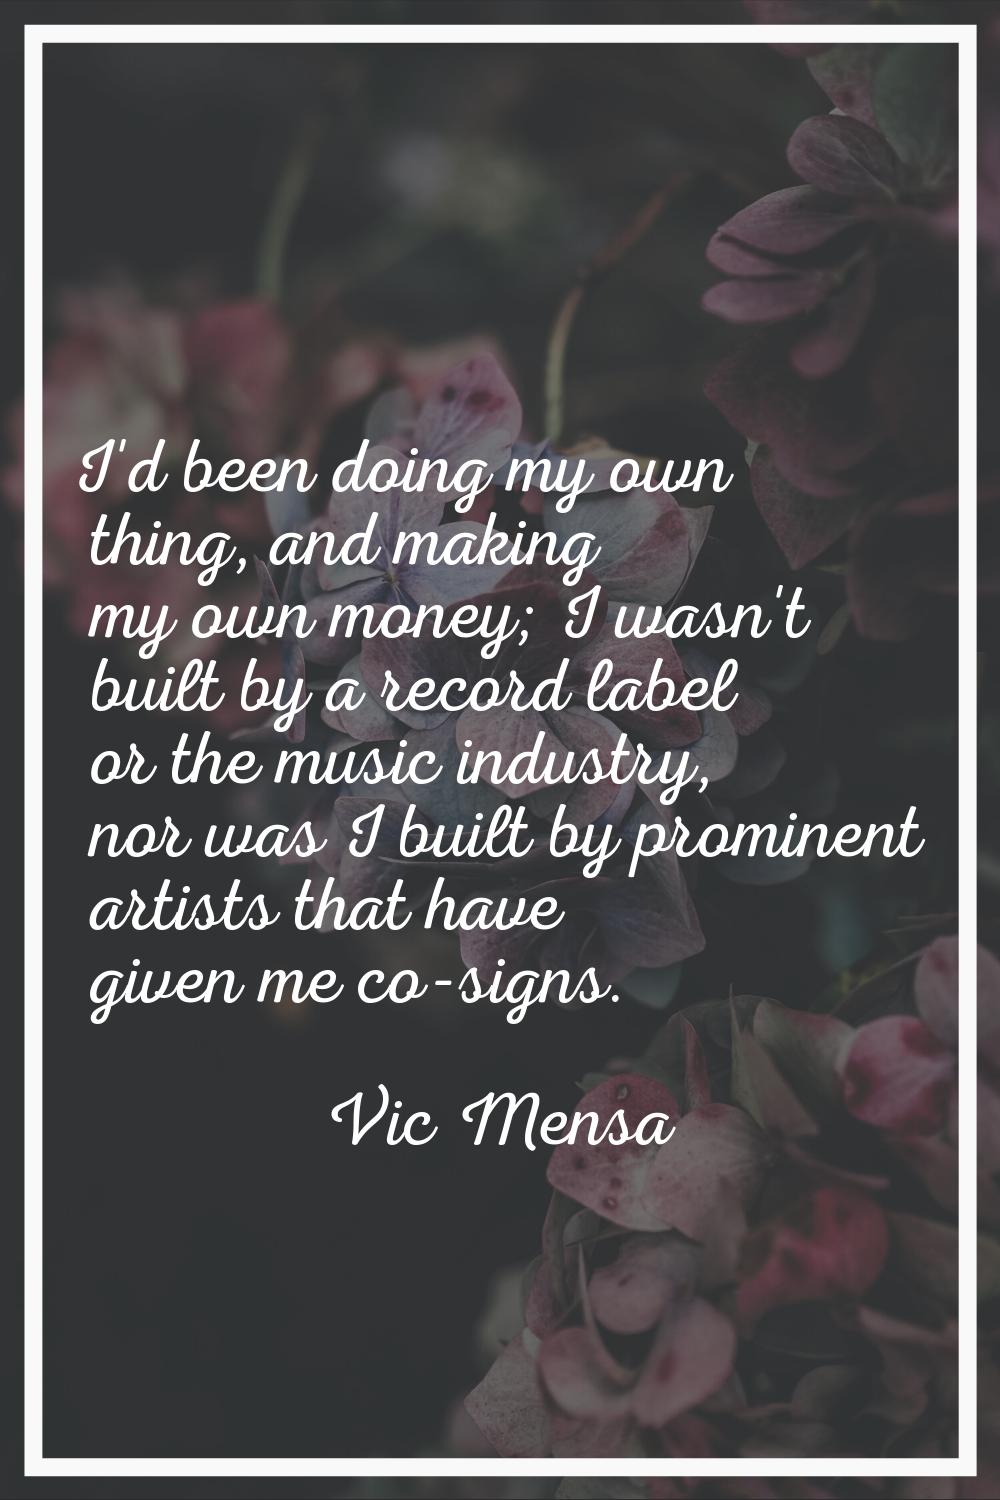 I'd been doing my own thing, and making my own money; I wasn't built by a record label or the music